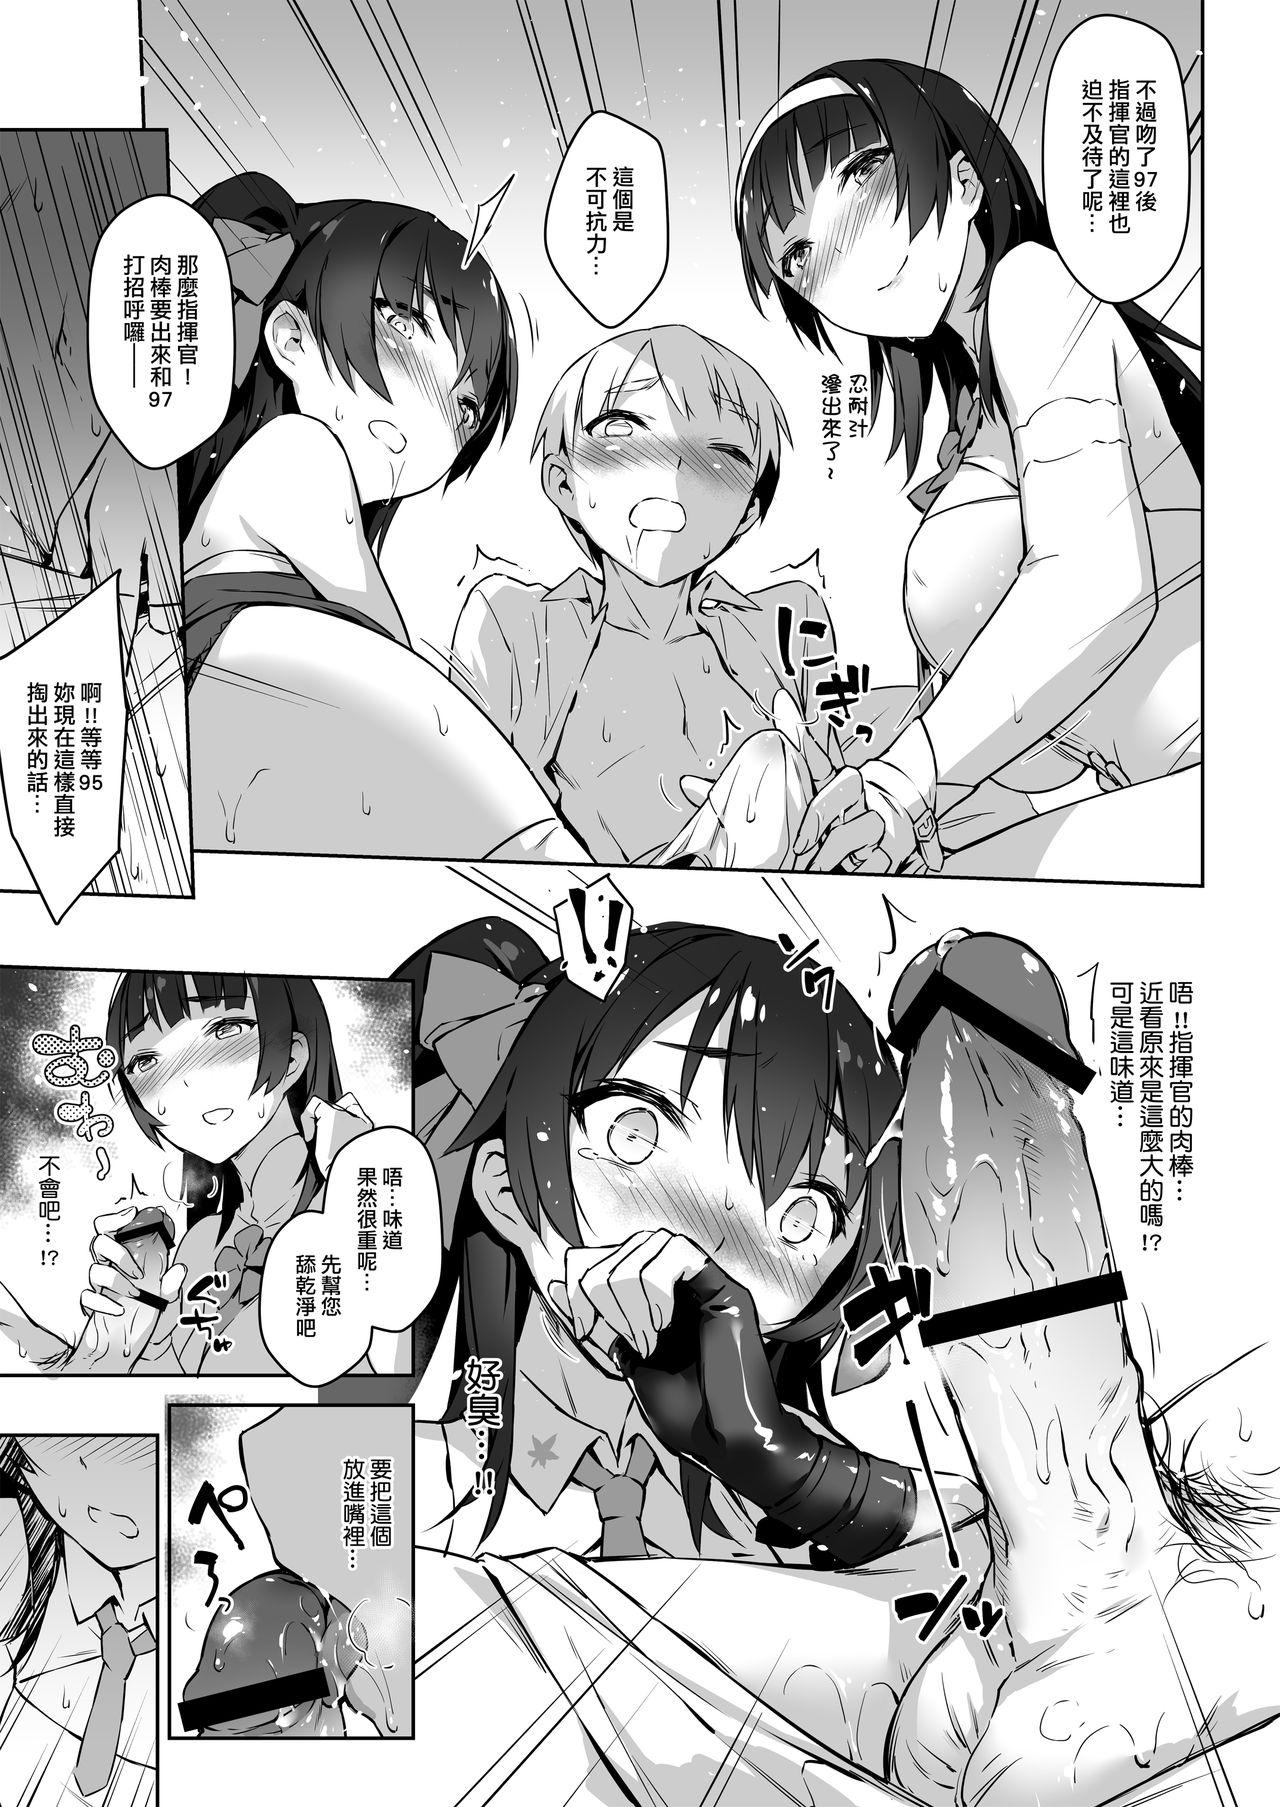 Nipple Type 95 Type 97, Let Sister Teaches You!! - Girls frontline Gaysex - Page 11